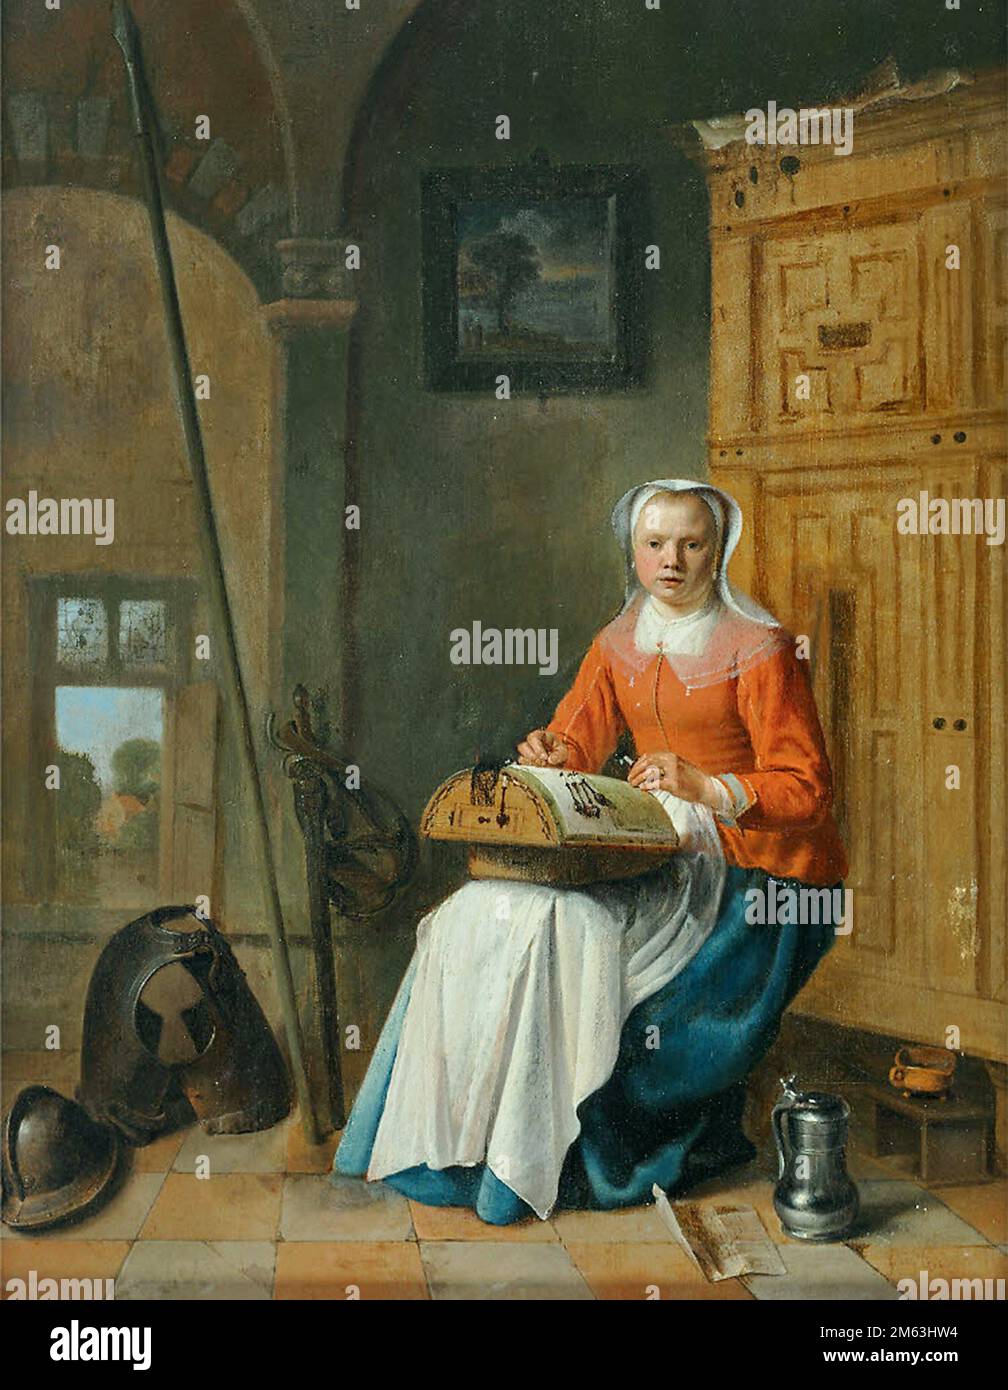 Pieter Jacobsz. Codde (Dutch artist, 1599-1678). Sewing Indoors, The lacemaker. He was a Dutch Golden Age painter and printmaker. He is best known Stock Photo